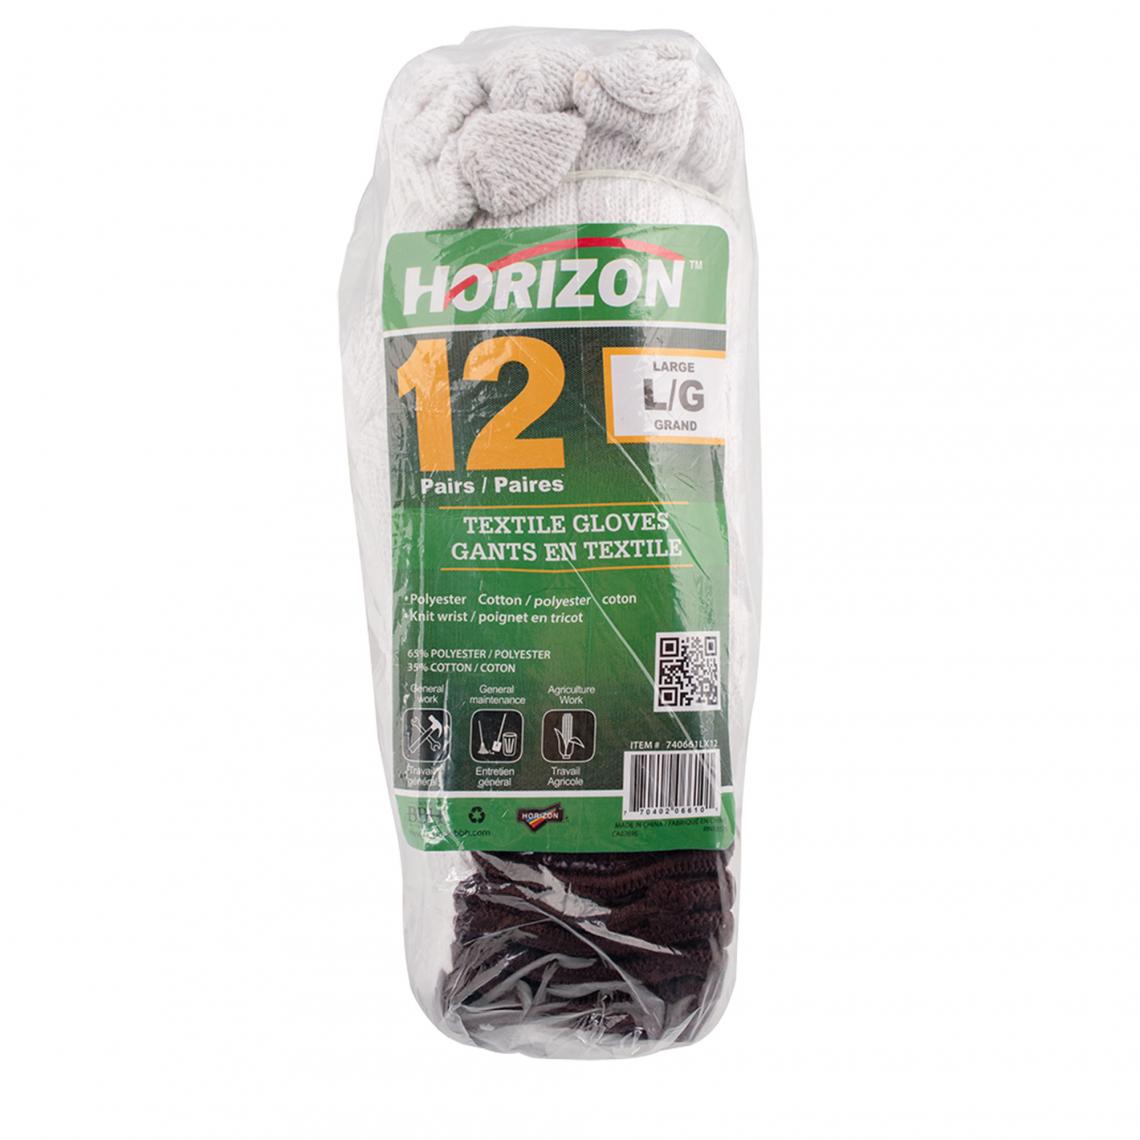 Horizon White Knit Poly/Cotton Glove Liners - Pack of 12 Pairs